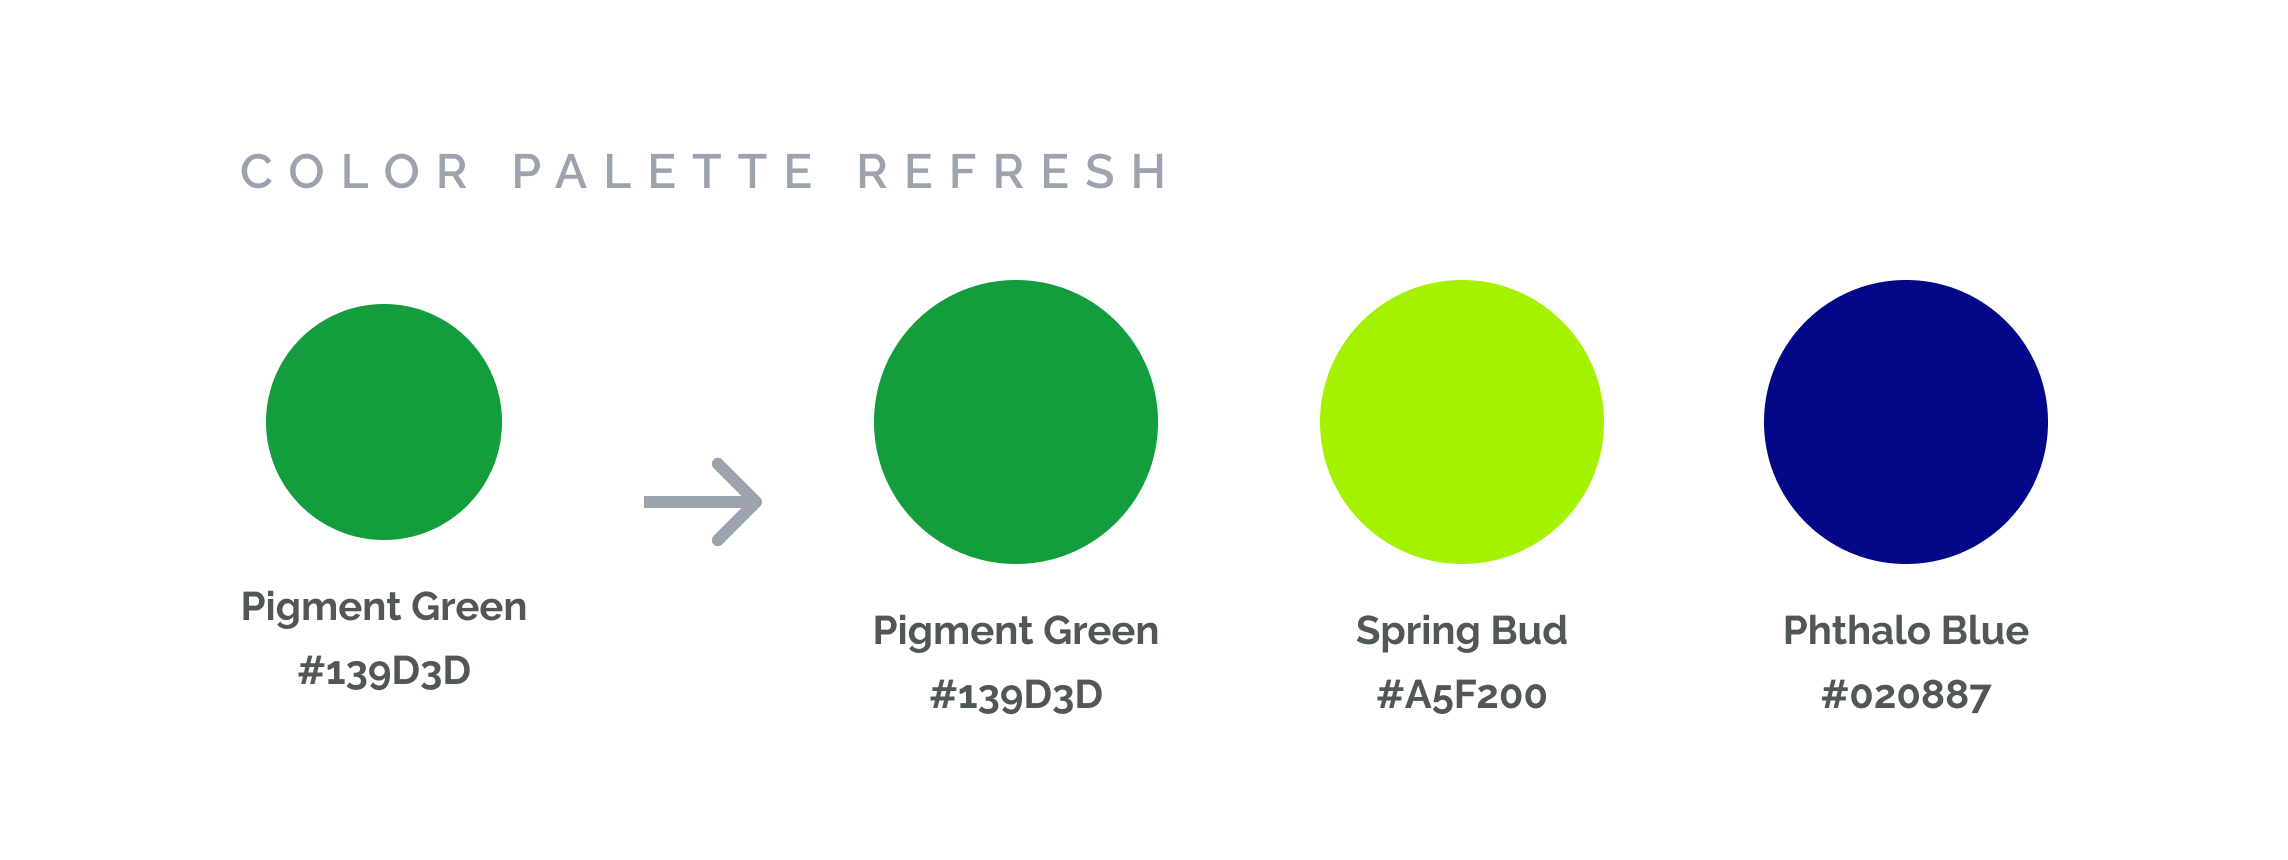 The image shows the old color palette on the left and the new one on the right, which consists of three colors: the first is pigment green, the second is a soft, stimulating green called spring bud, and finally a shade of blue called phthalo blue.